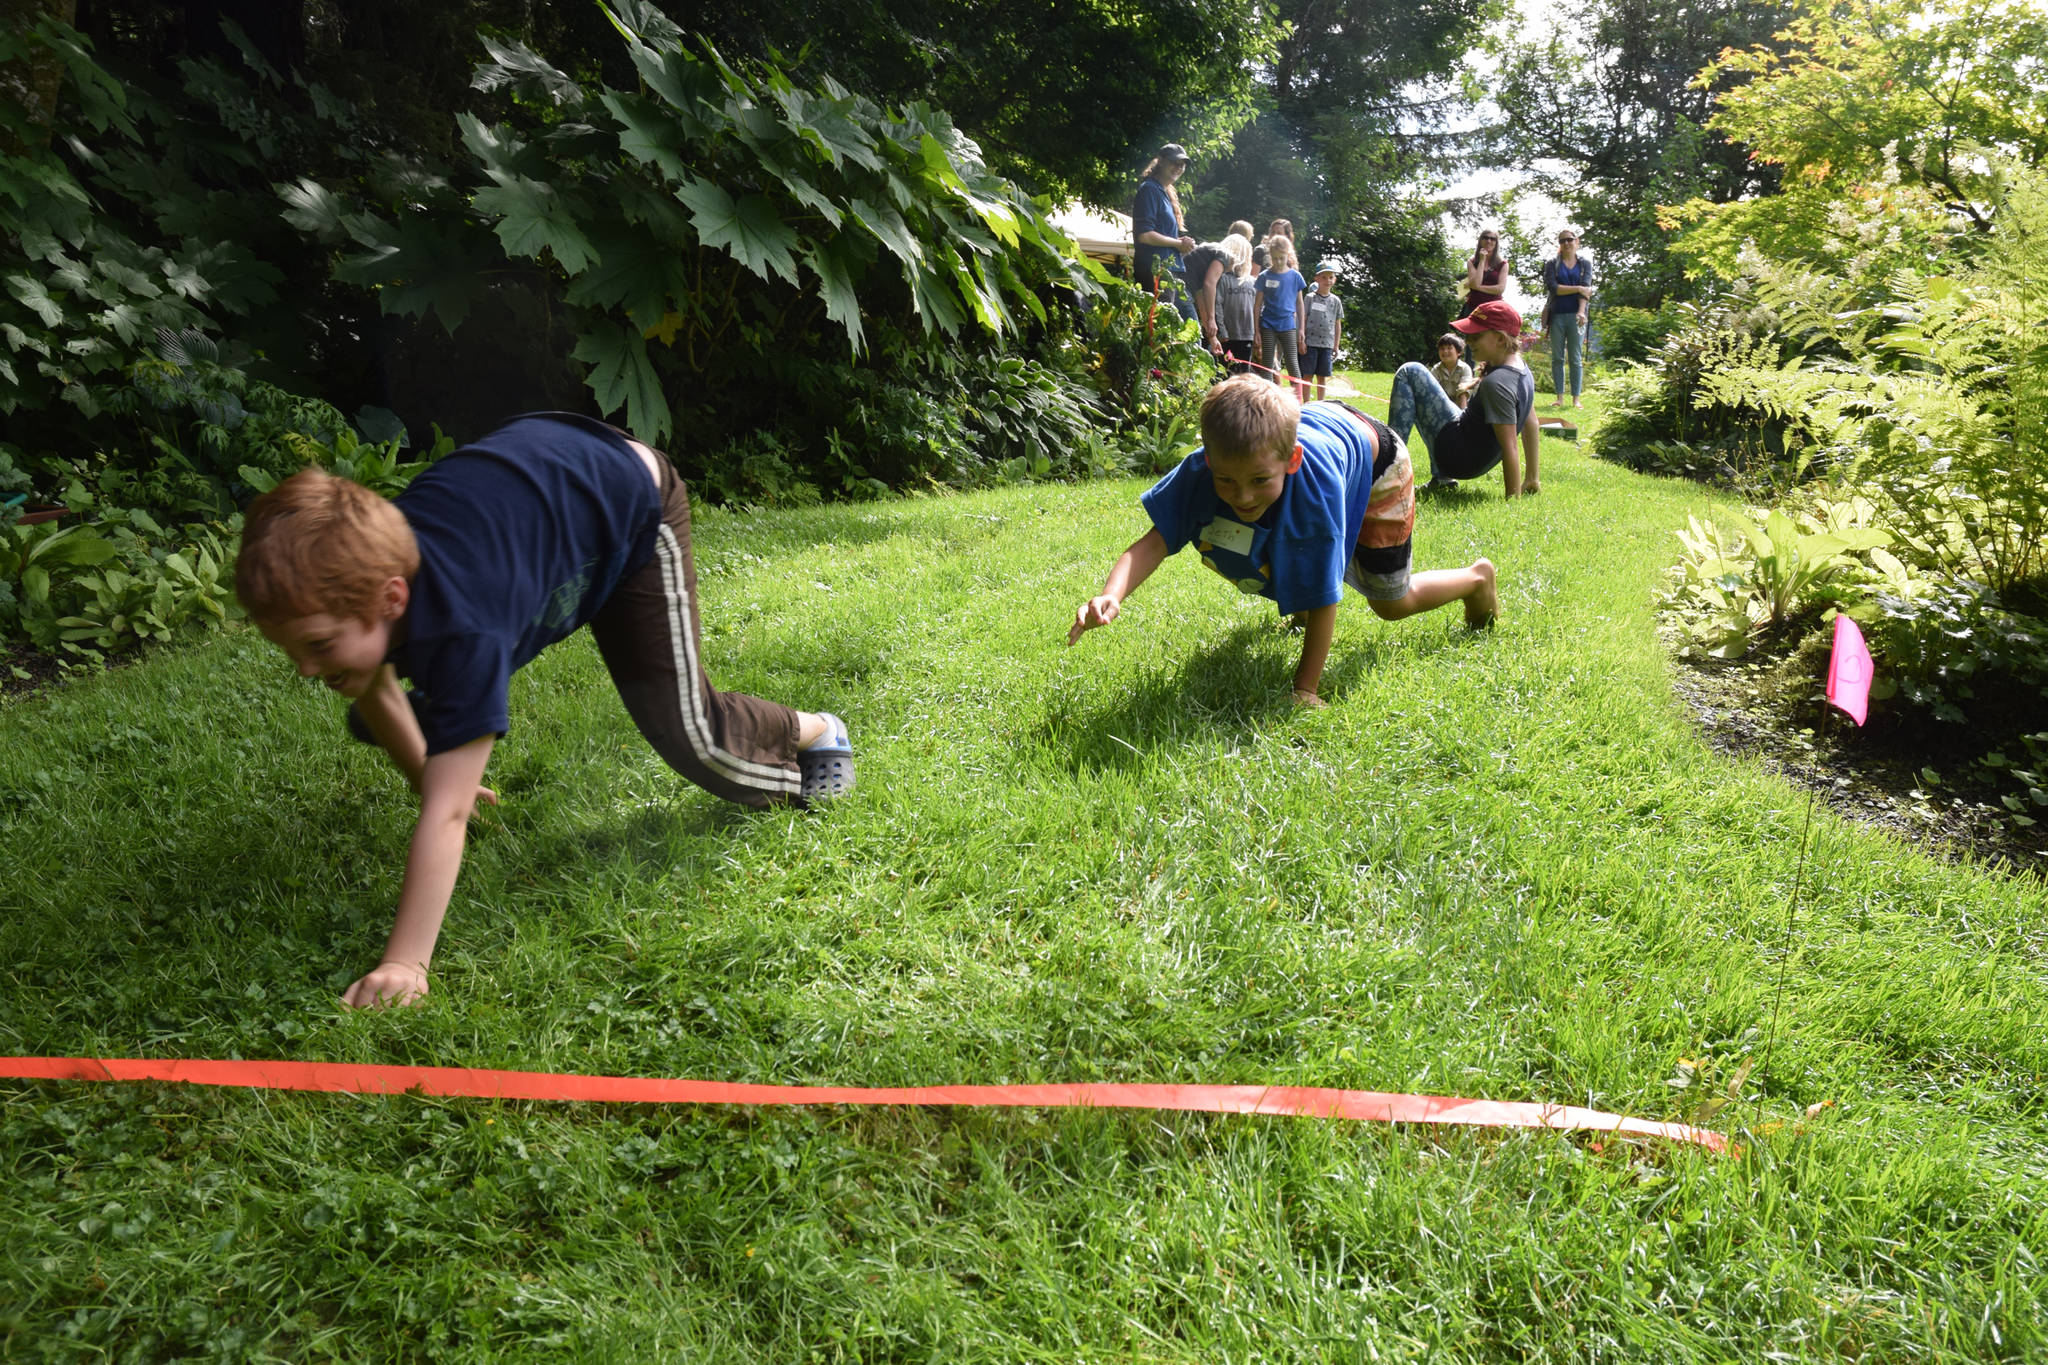 Kids participate in a spider crawl race during Bug Day at the Jensen-Olson Arboretum on Saturday, Aug. 11, 2018. (Kevin Gullufsen | Juneau Empire)